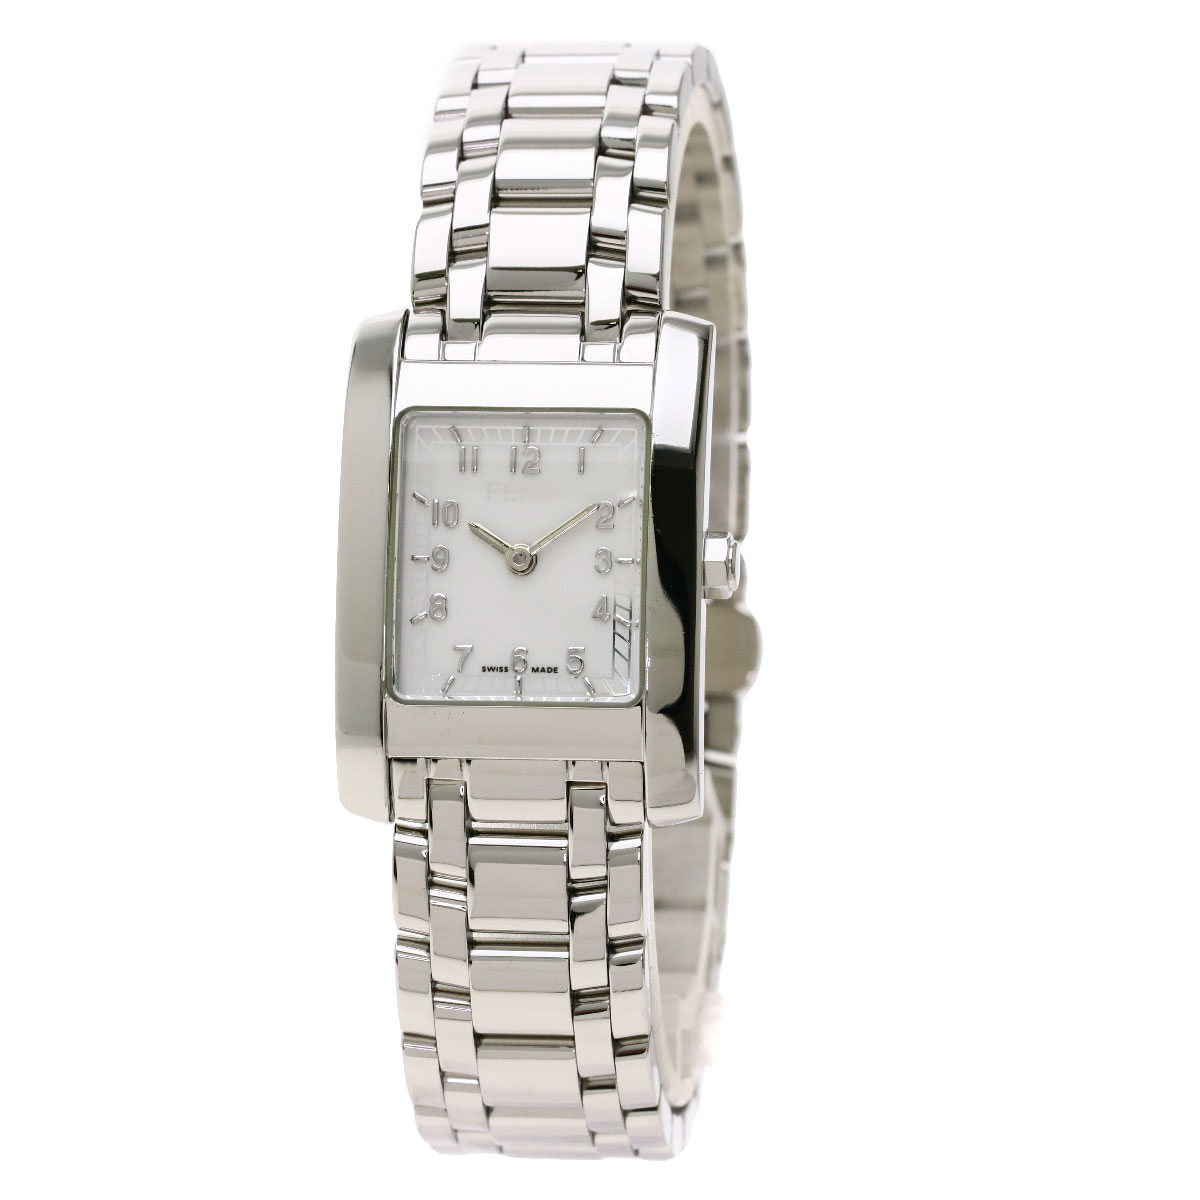 FENDI Square face Watches 7000L Stainless Steel/Stainless Steel Ladies ...